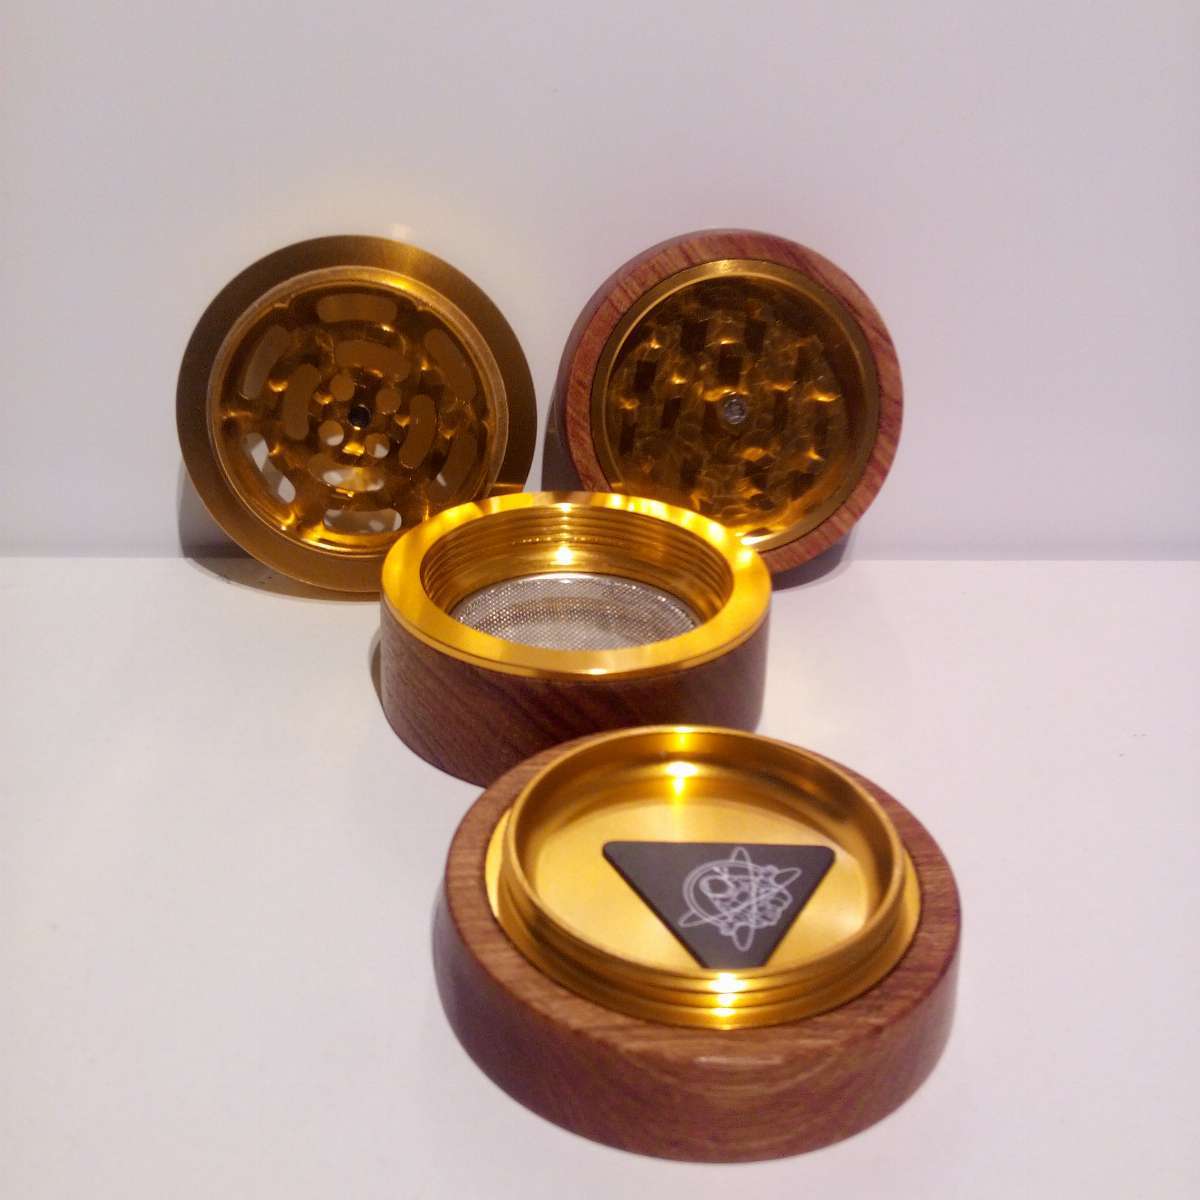 Grinder wood And gold